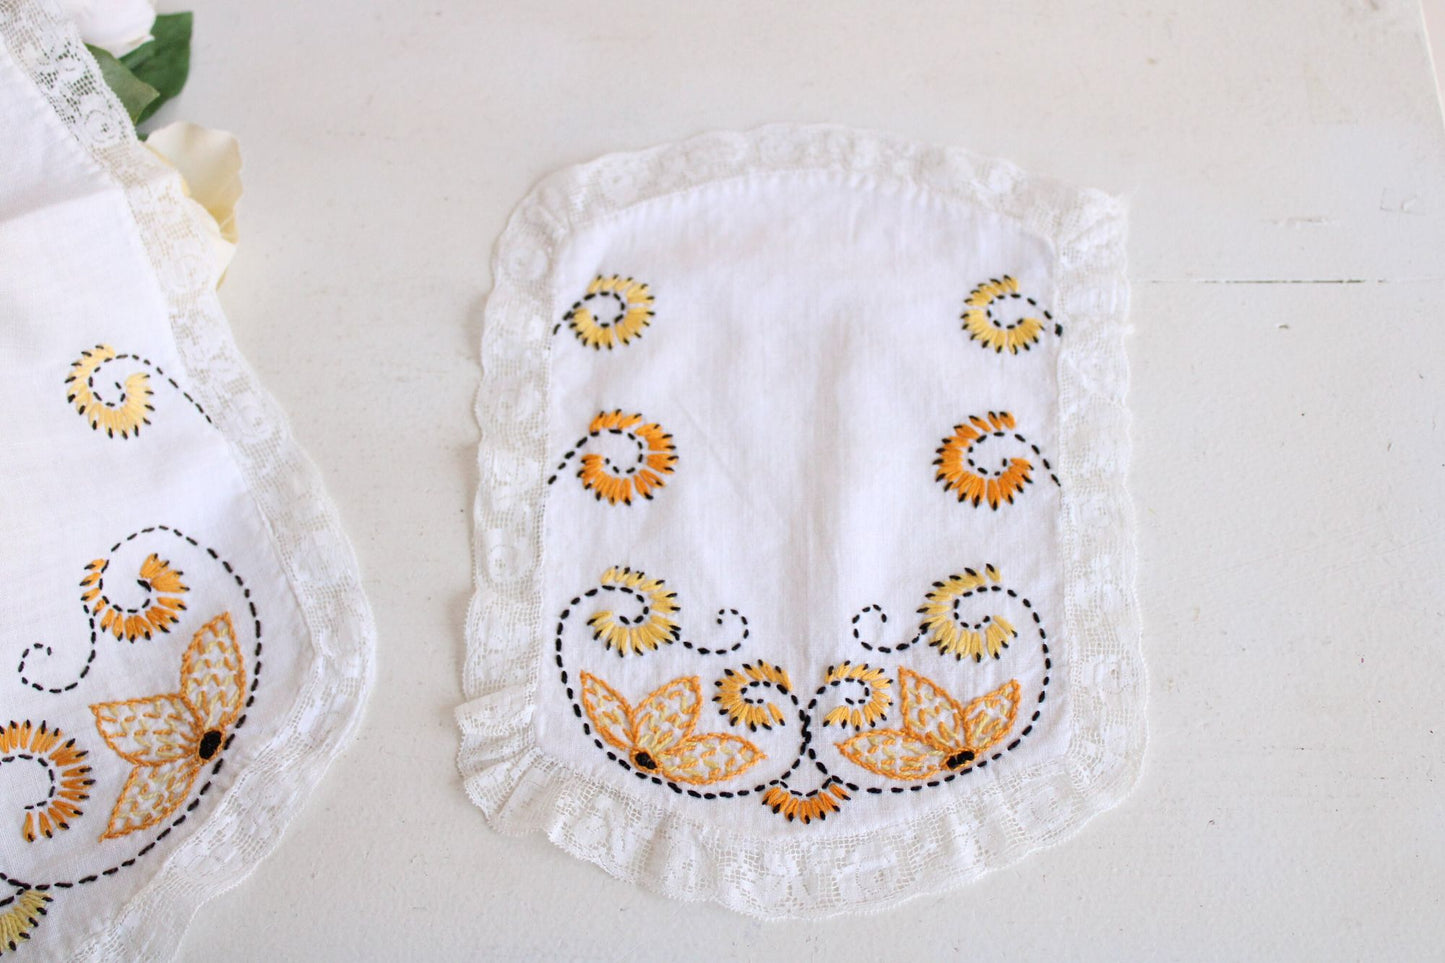 Vintage 1940s Couch Cover Set, or Embroidered Doilies